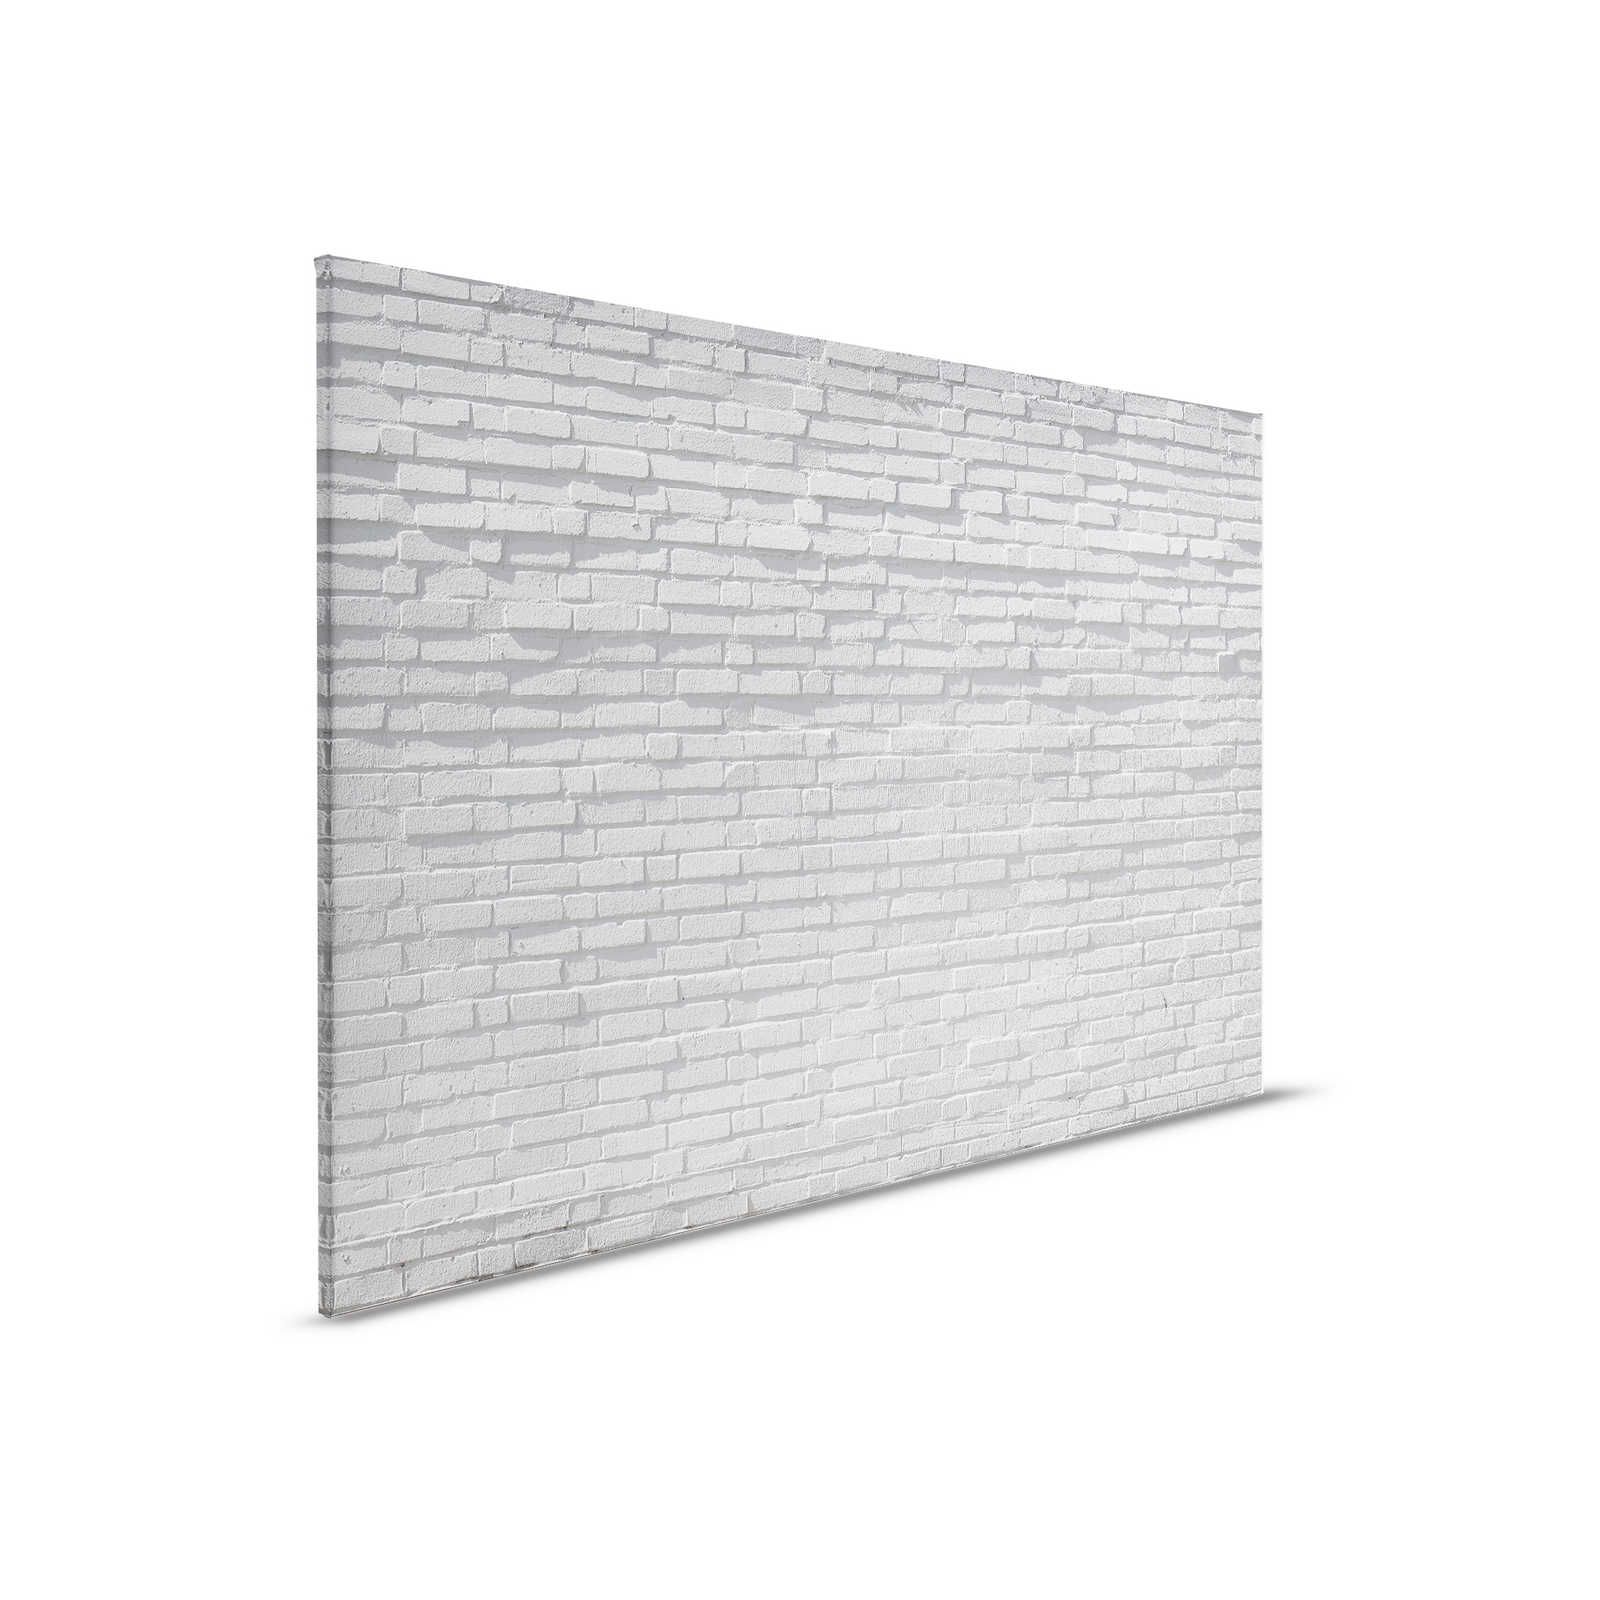         Canvas painting grey brick wall in 3D look - 0,90 m x 0,60 m
    